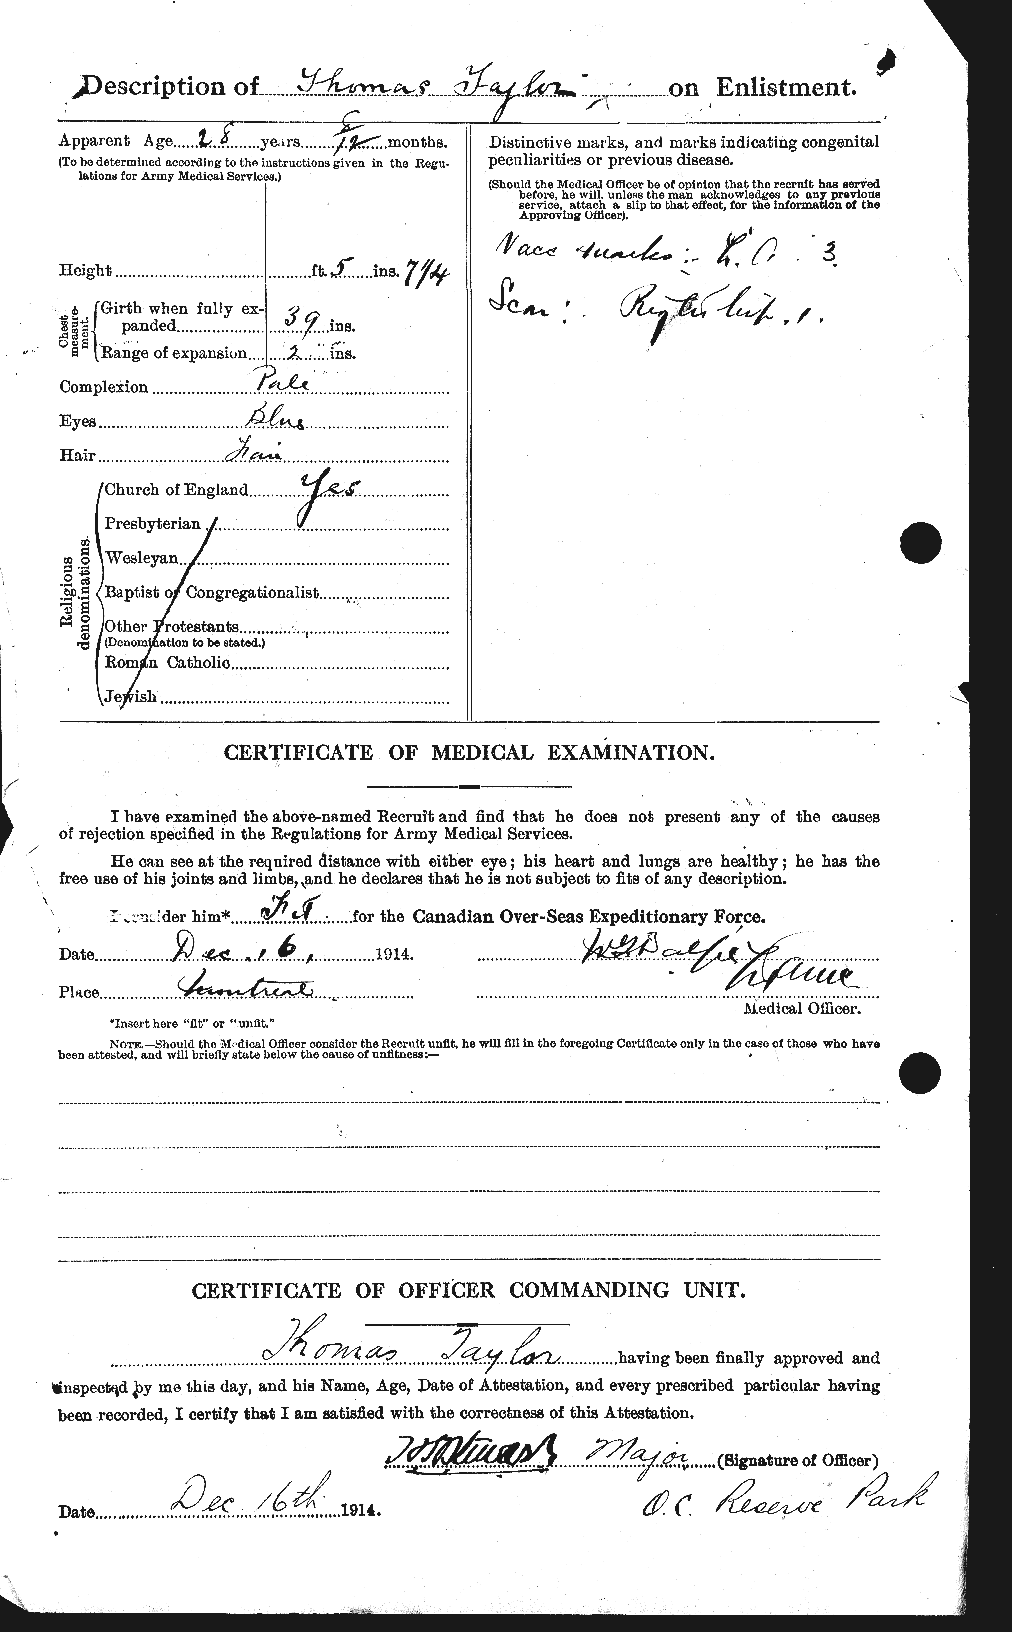 Personnel Records of the First World War - CEF 627960b